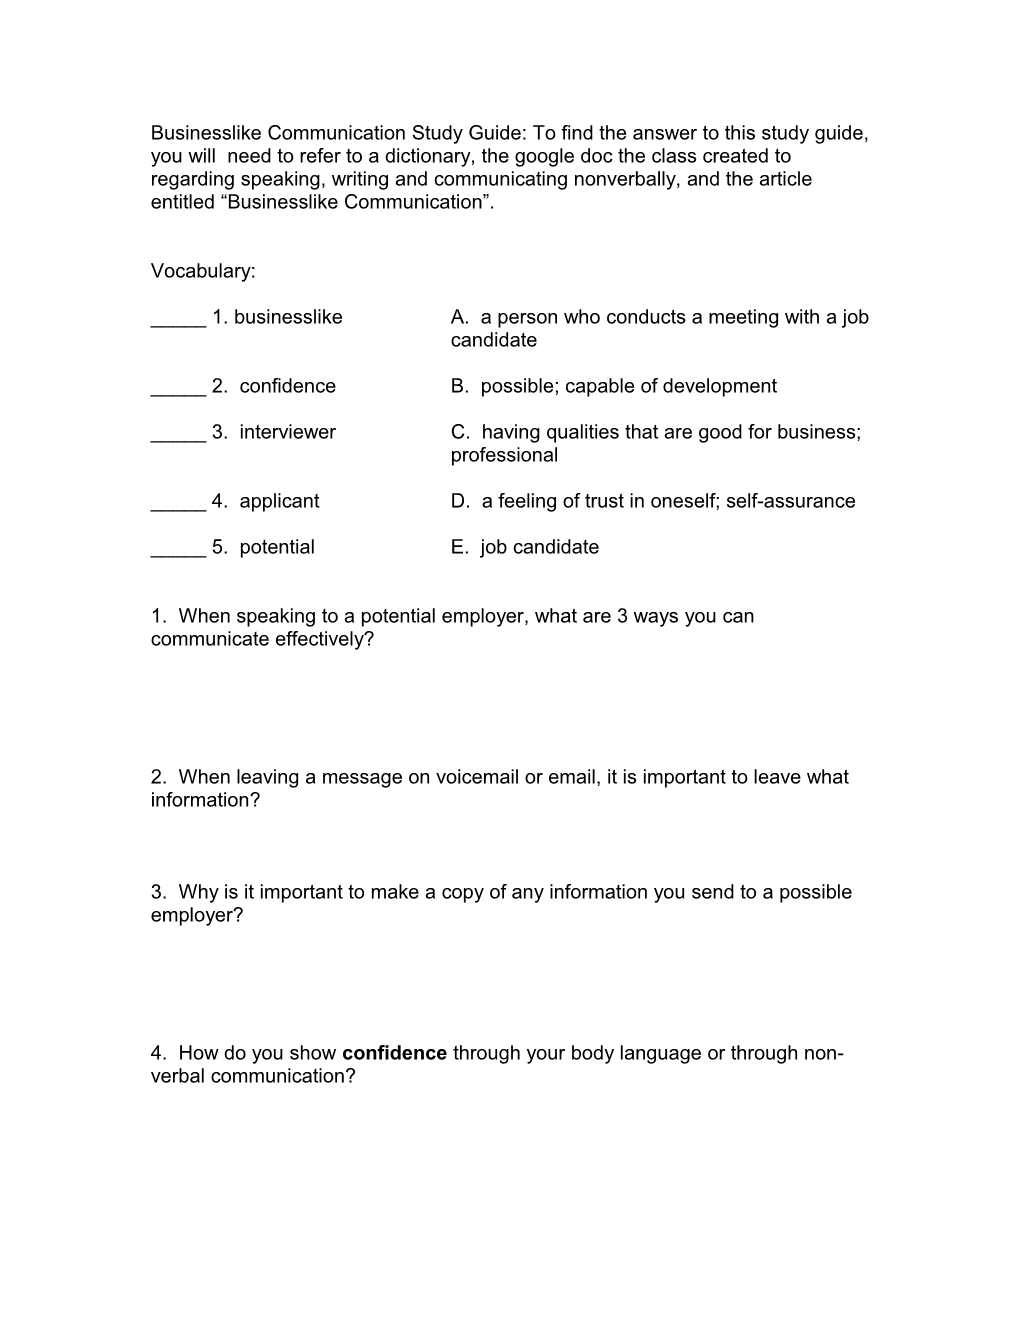 Businesslike Communication Study Guide: to Find the Answer to This Study Guide, You Will